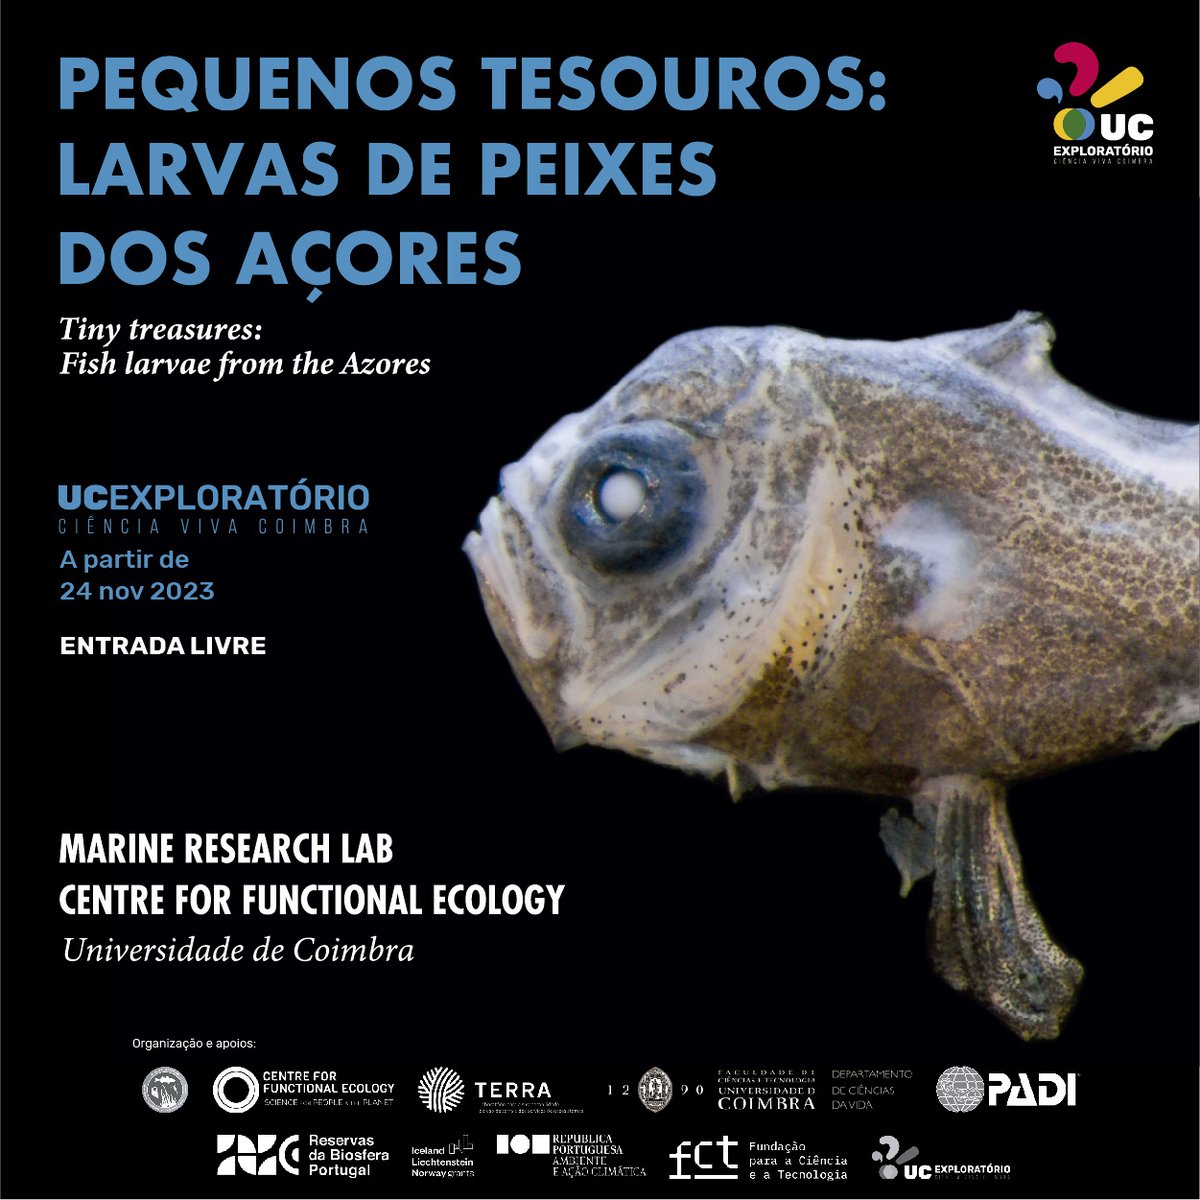 This is the new photographic exhibition of the @marineresearchL, which will be on display at the UC Exploratório - Ciência Vida of the @UnivdeCoimbra from 24 November. The inauguration of the exhibition is scheduled for 24 Nov, at 11 am in the Science Photo Gallery.🐟🐡🐠